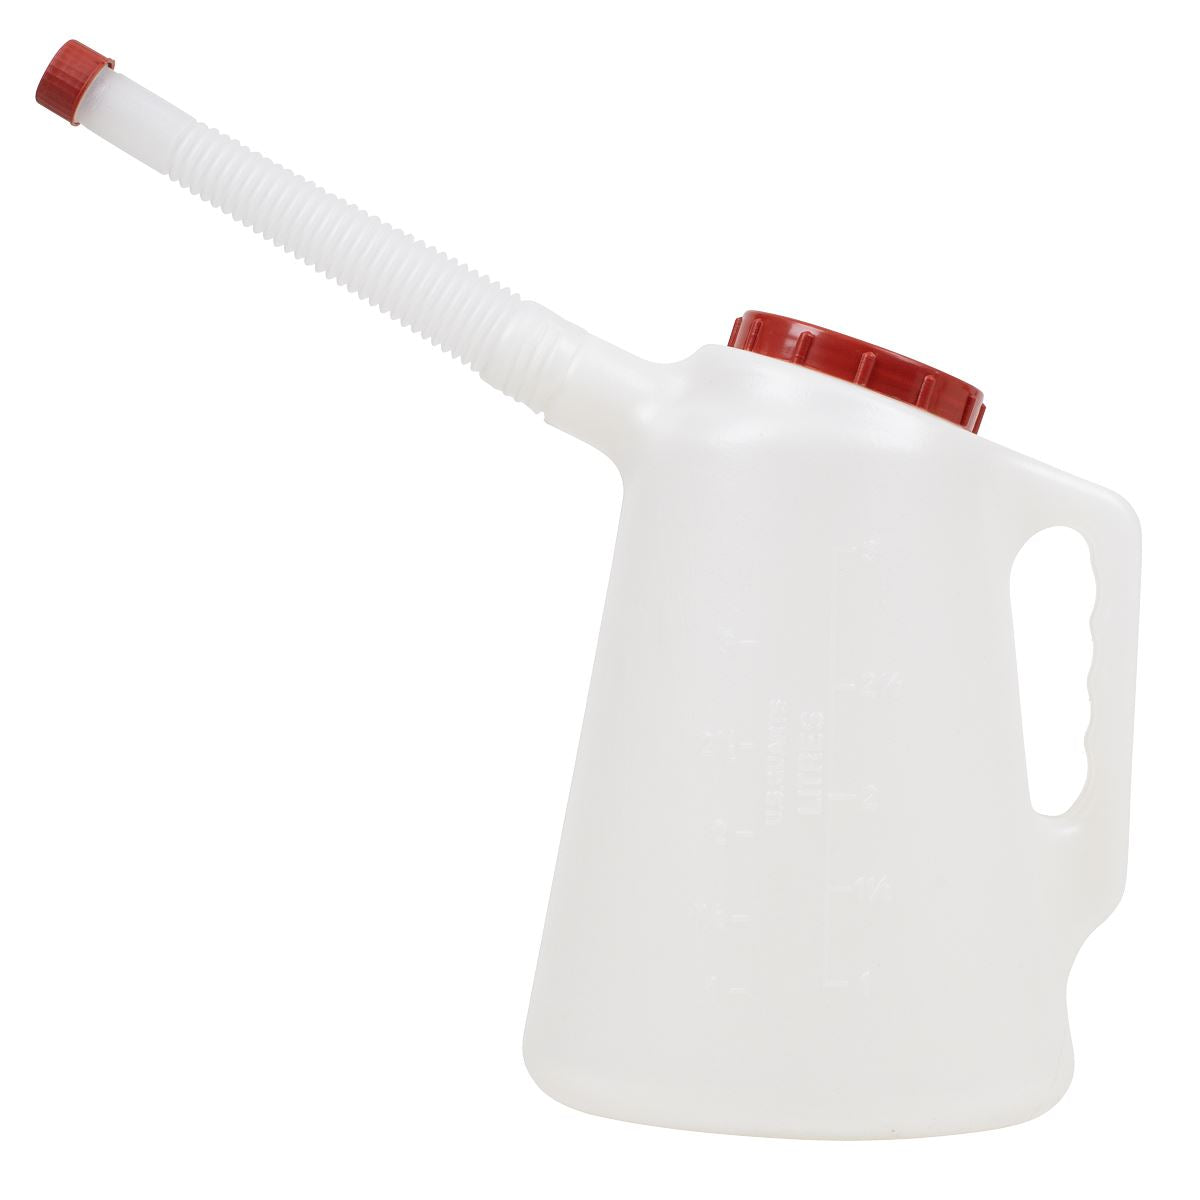 Sealey Oil Container with Flexible Spout 3L - Red Lid